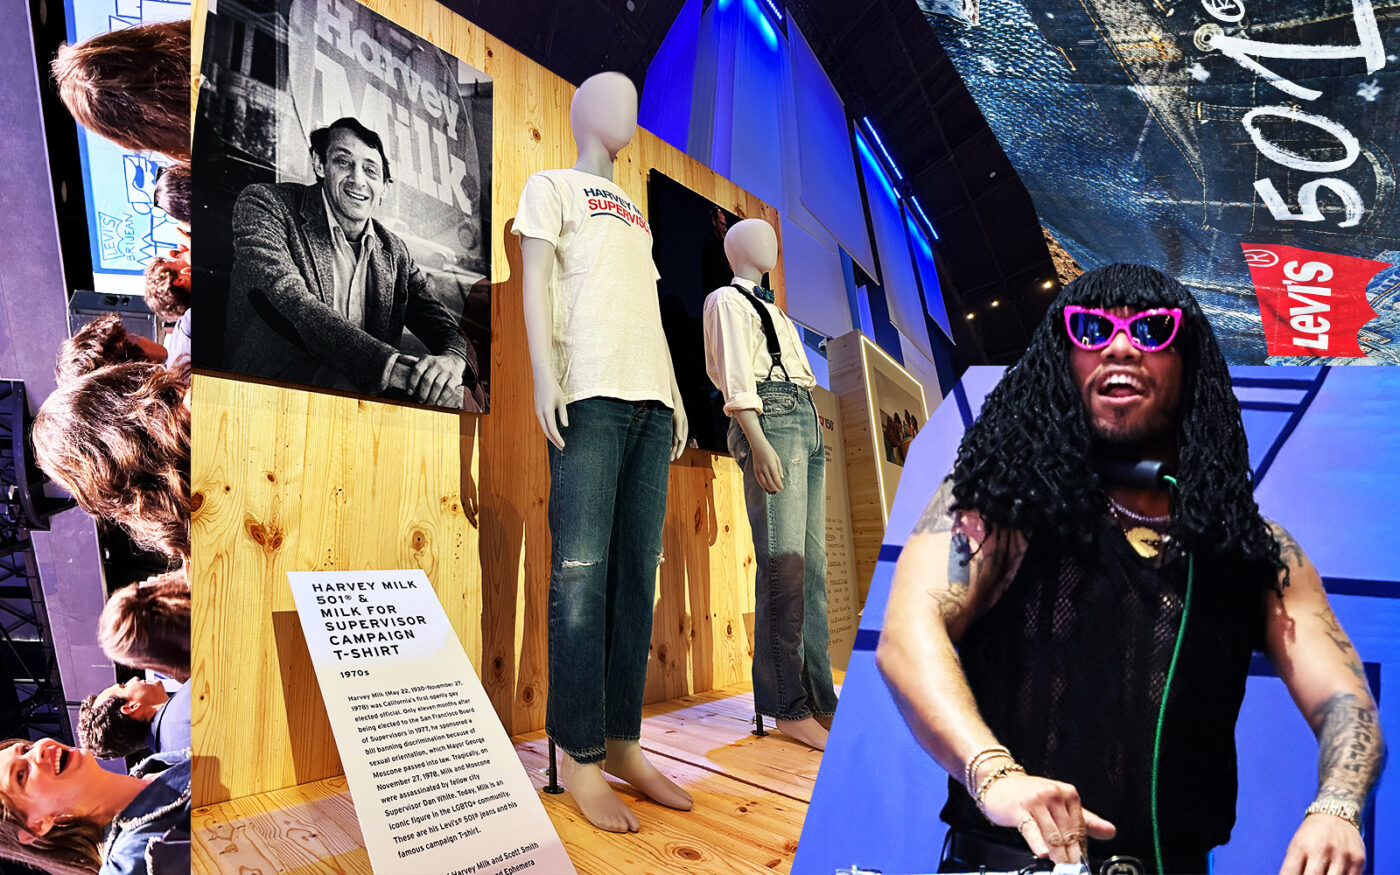 A photo illustration of Levi's "The 501 Experience" event in San Francisco (Photos by Emily Landes for The Real Deal)